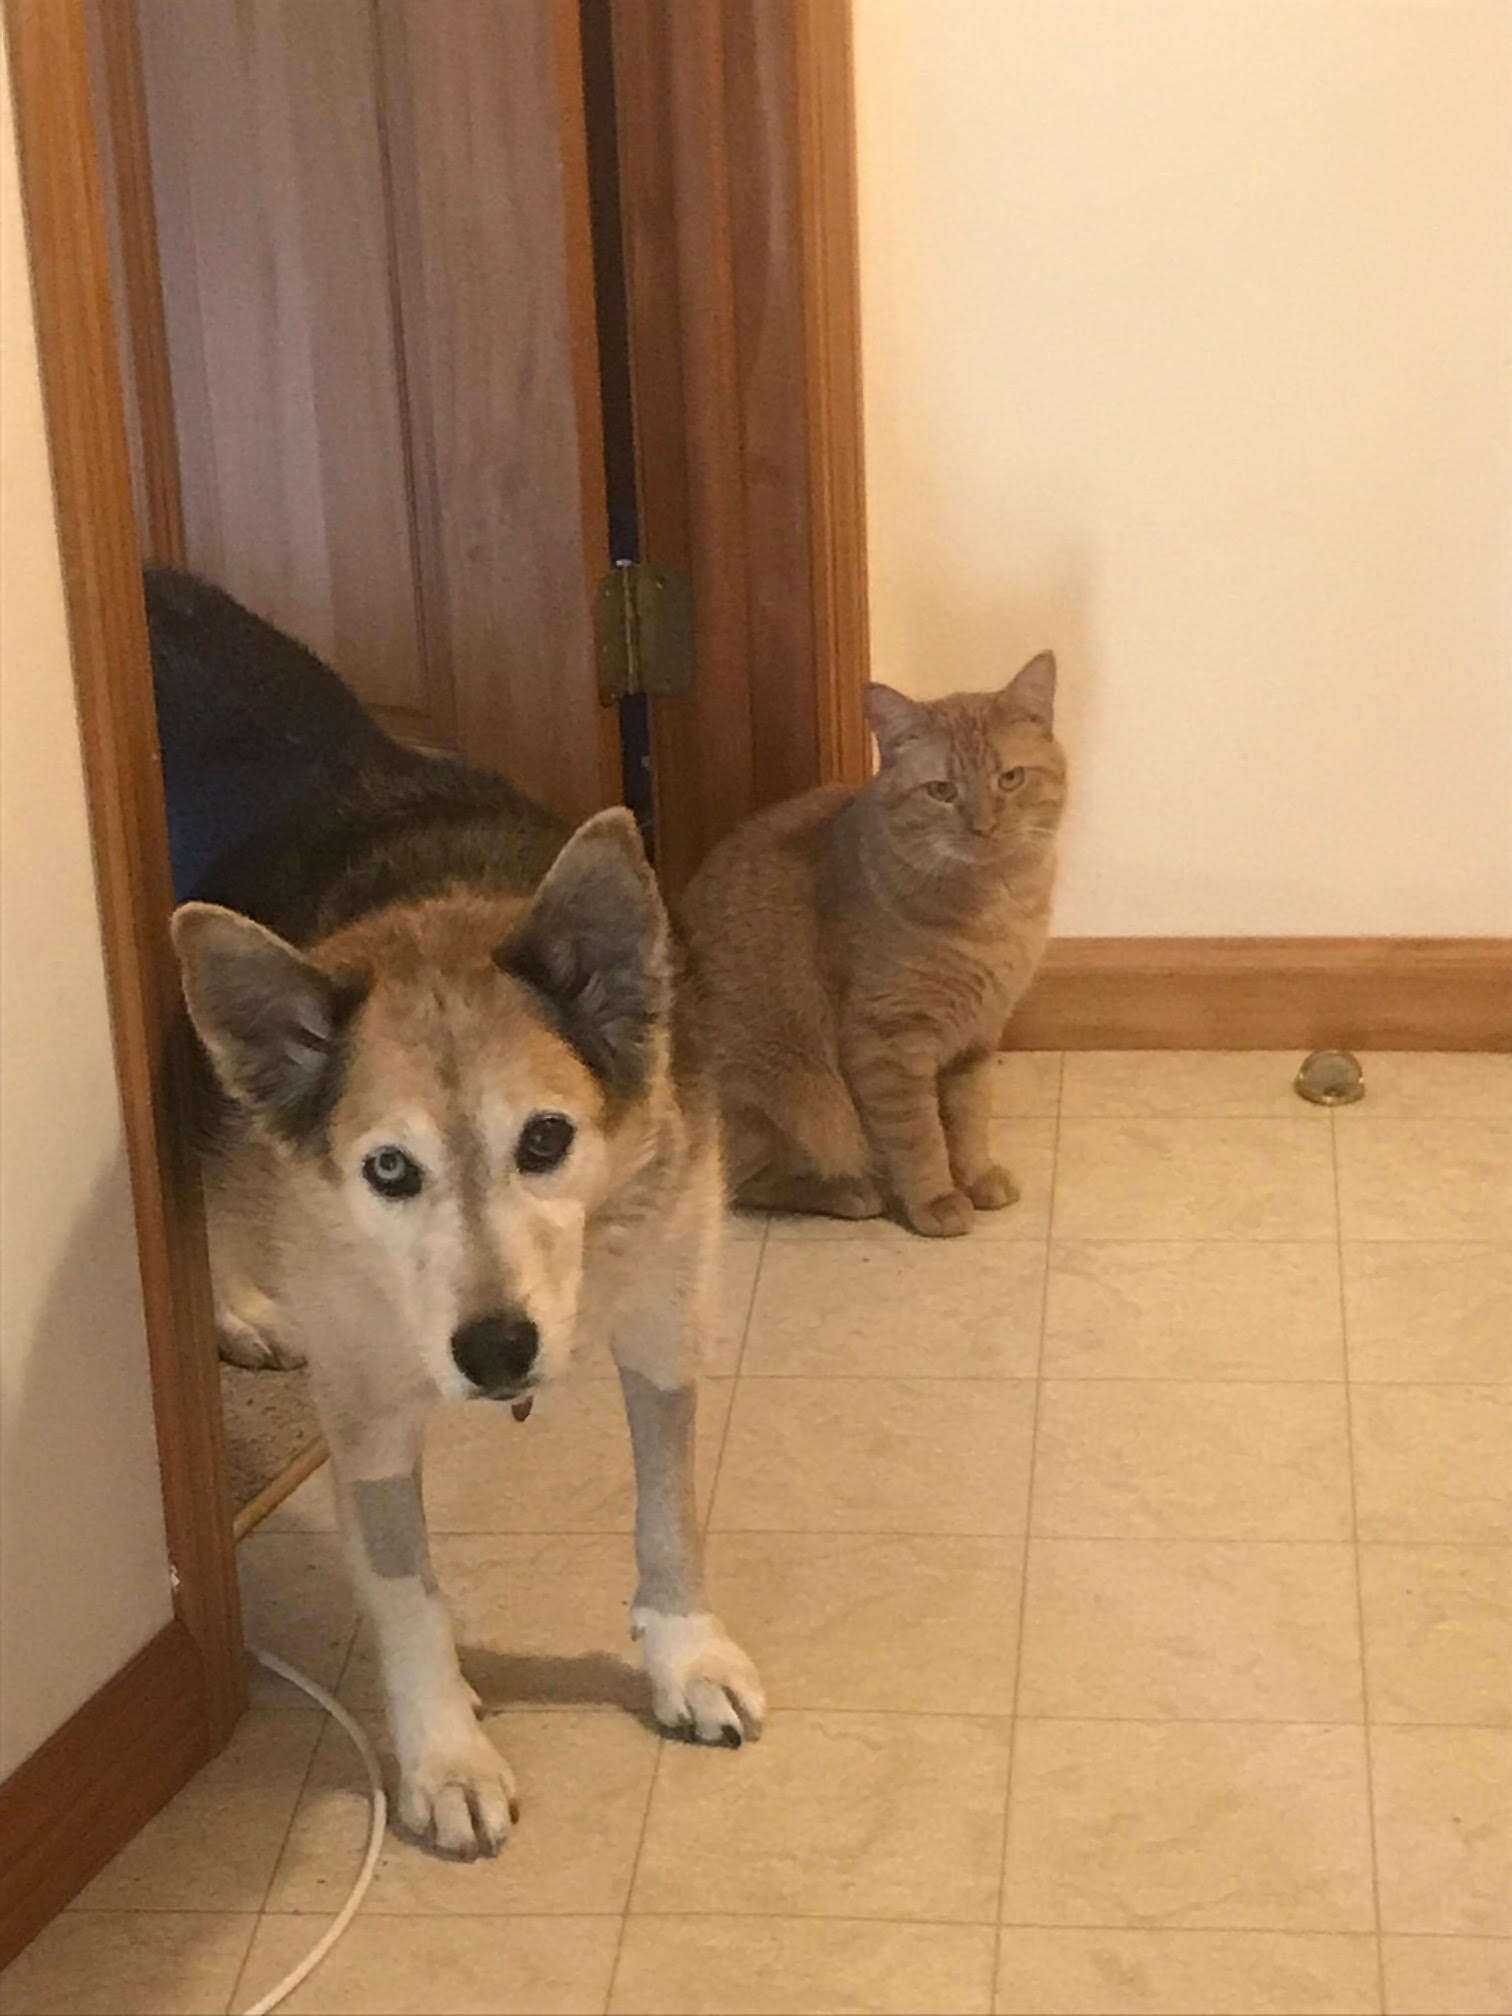 Dog and cat in doorway together